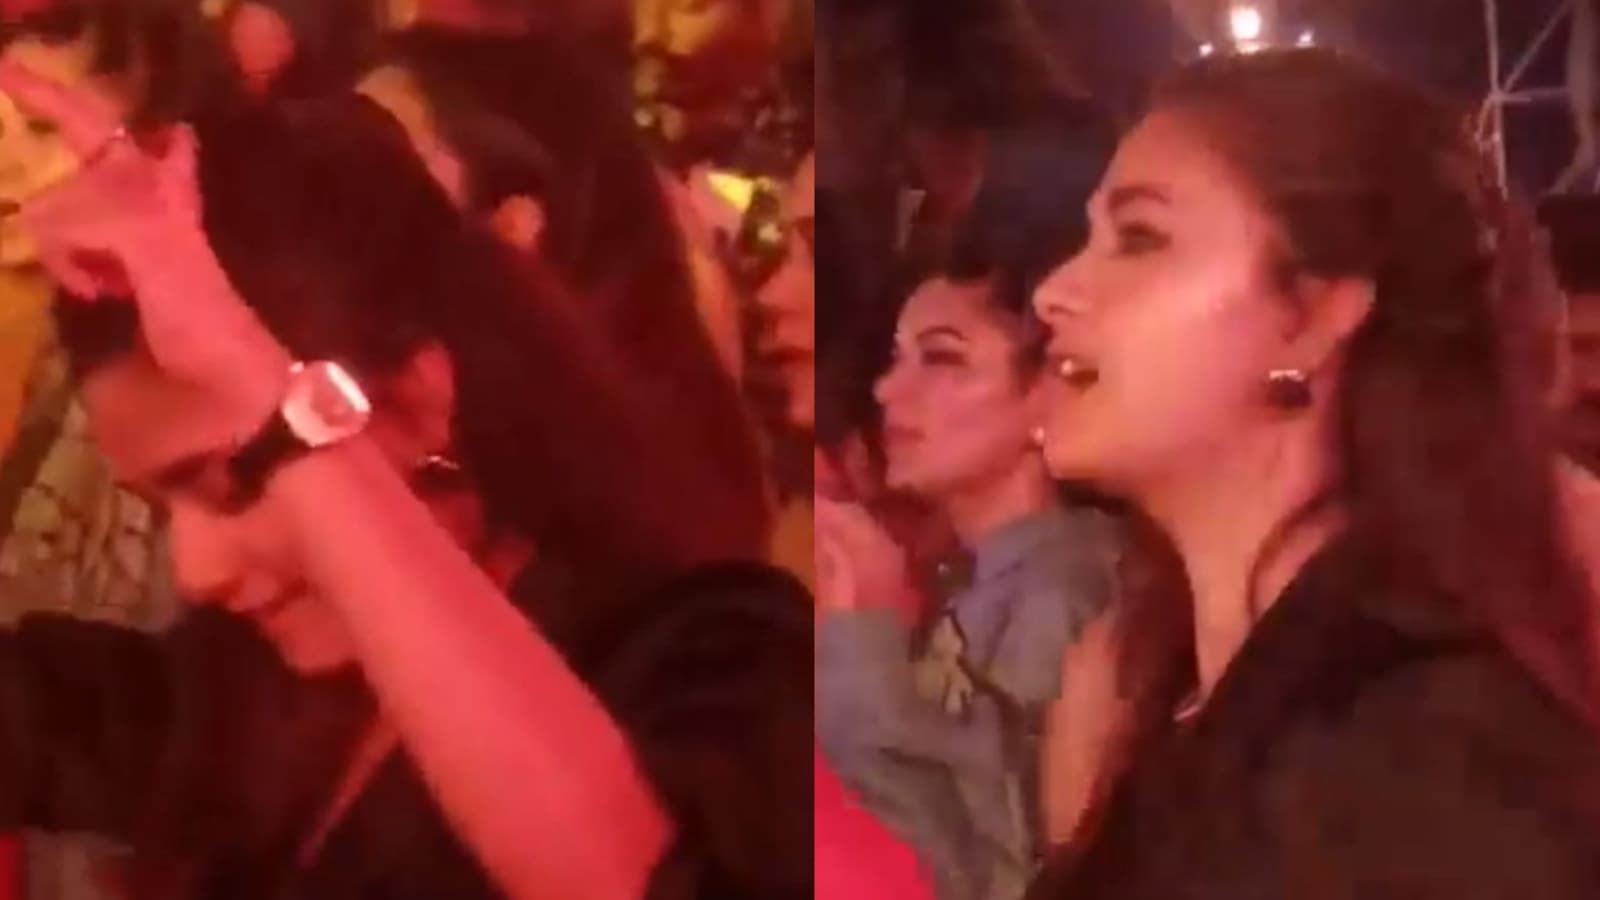 Keerthy Suresh grooves to Vijay’s song at Anirudh concert, check out her fangirl moment